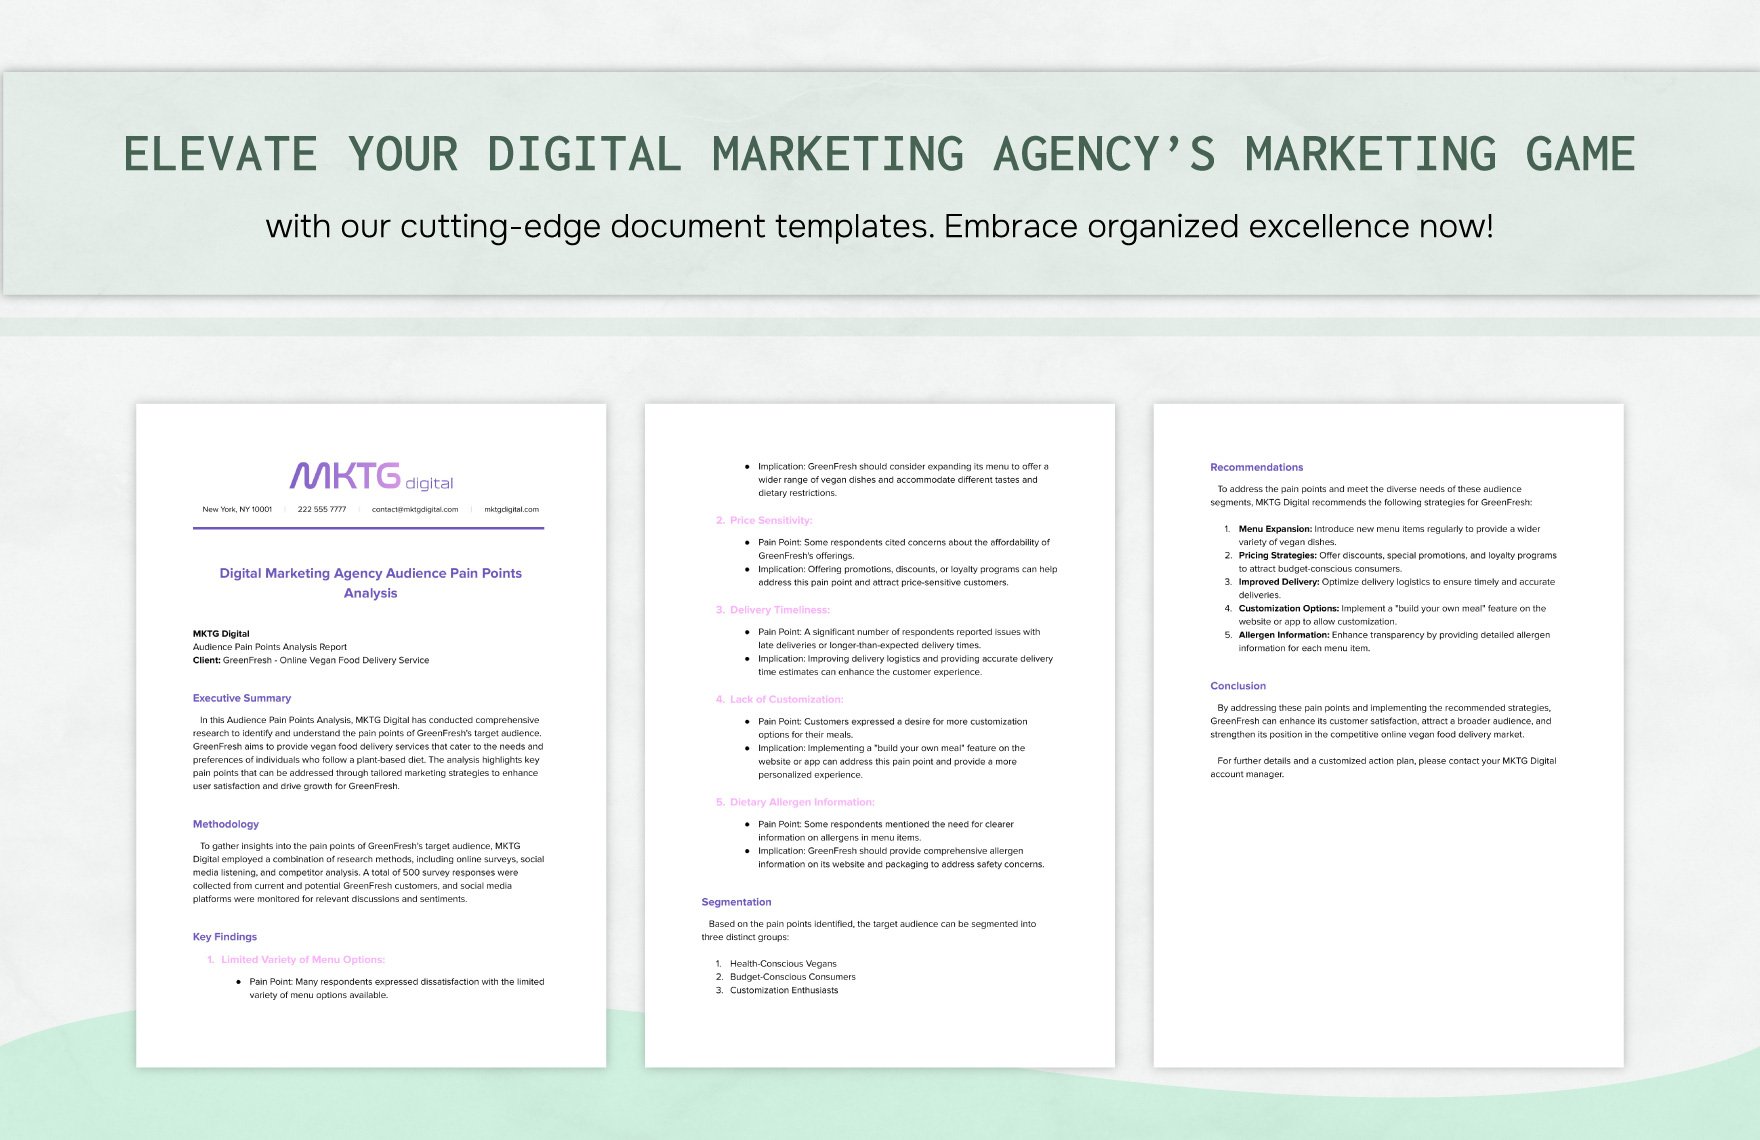 Digital Marketing Agency Audience Pain Points Analysis Template